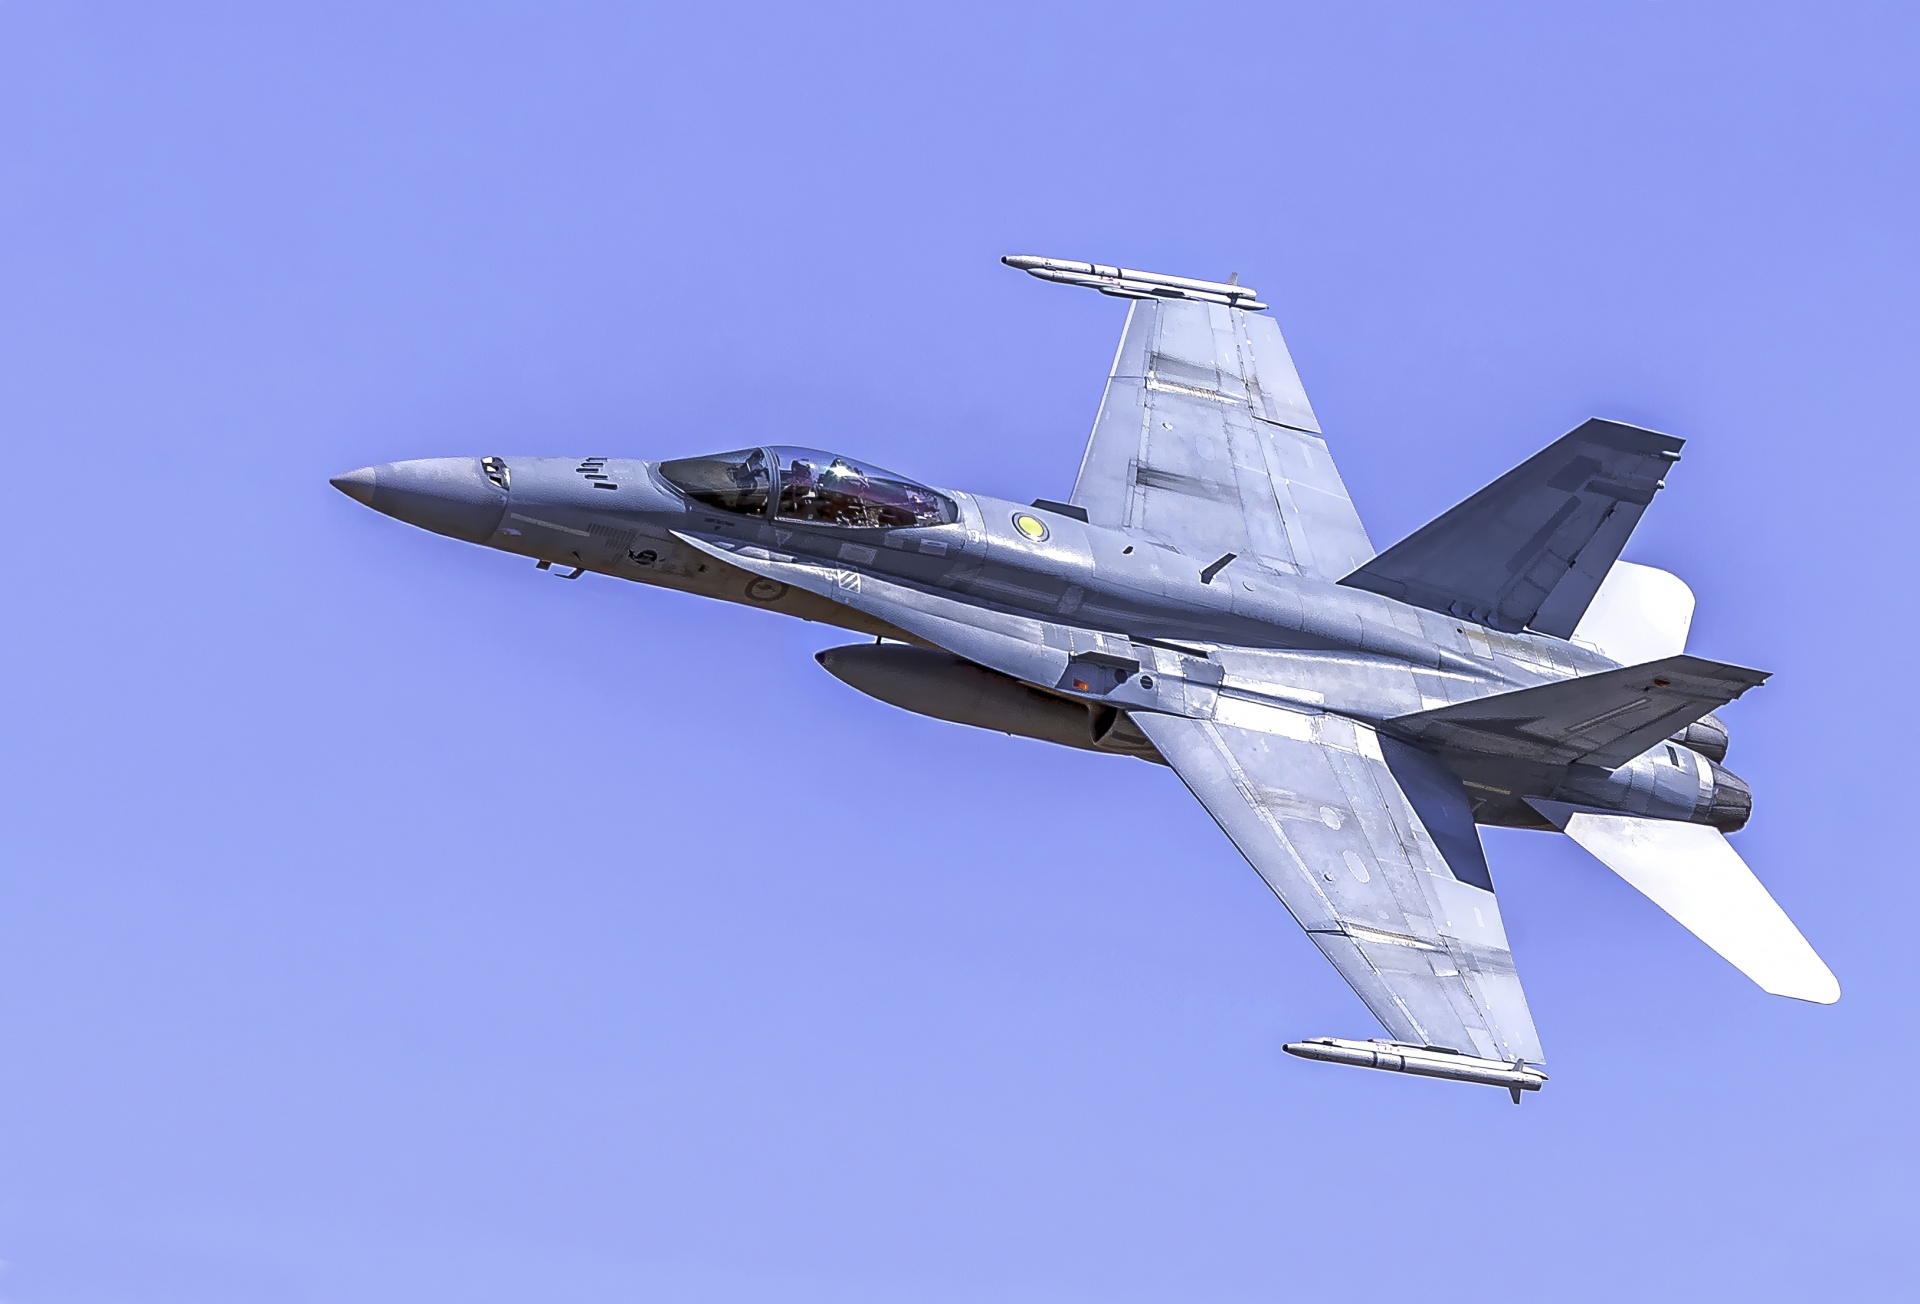 Royal Australian Air Force FA-18A Hornet is a single seat Multi-role fighter